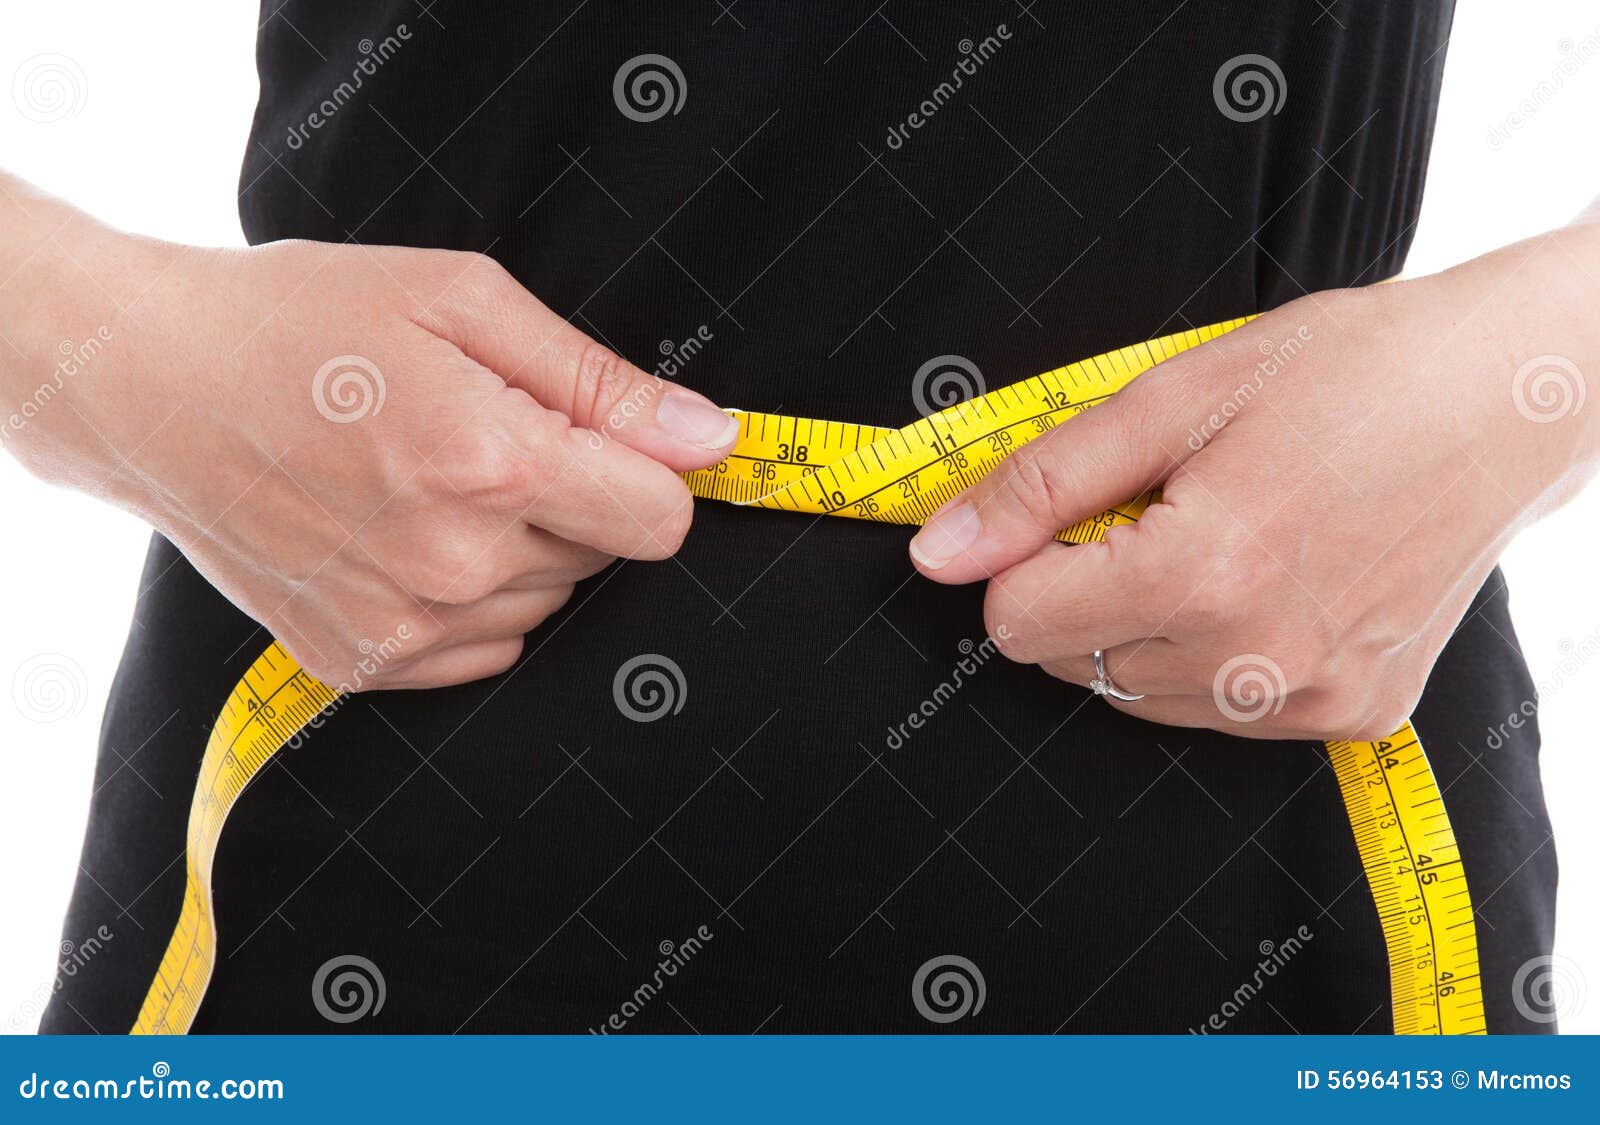 the woman in black measures her waist circumference with measuri